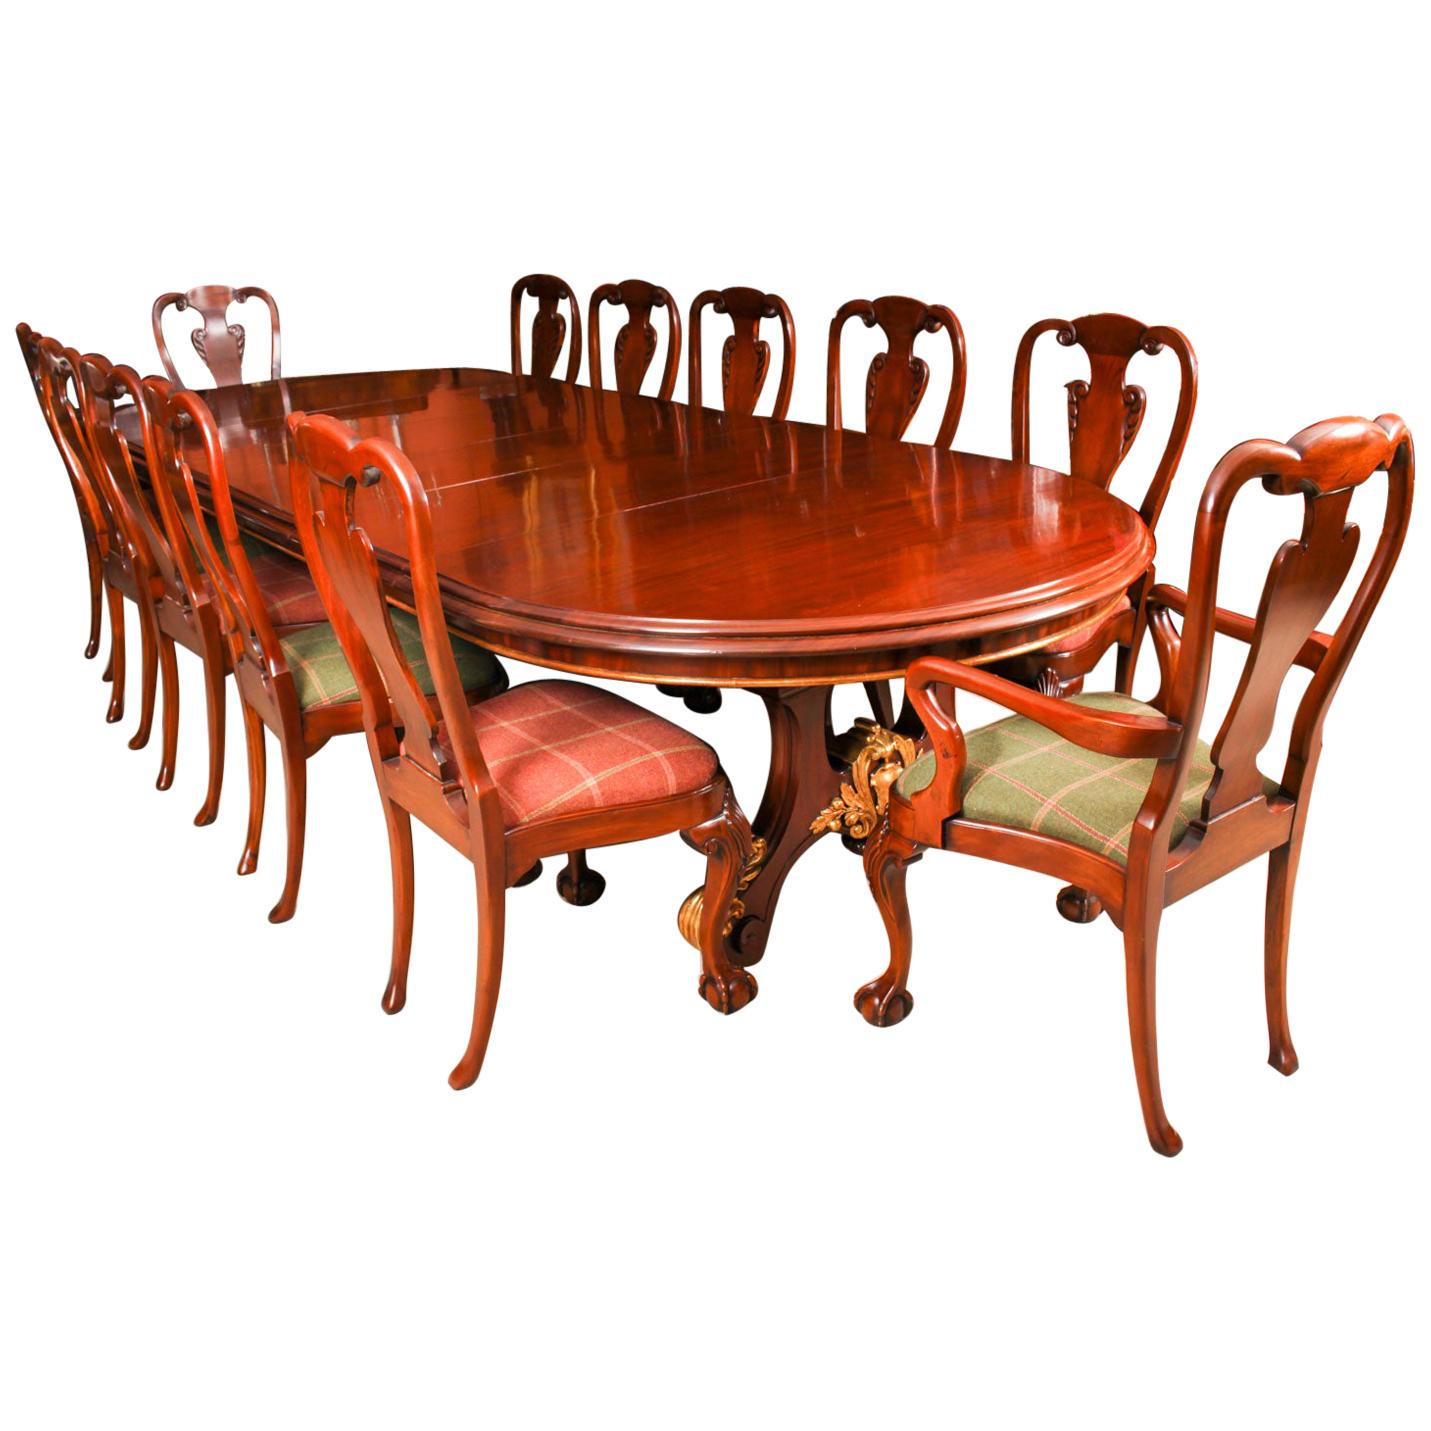 Antique Victorian Mahogany Twin Base Dining Table & 12 Chairs, 19th Century